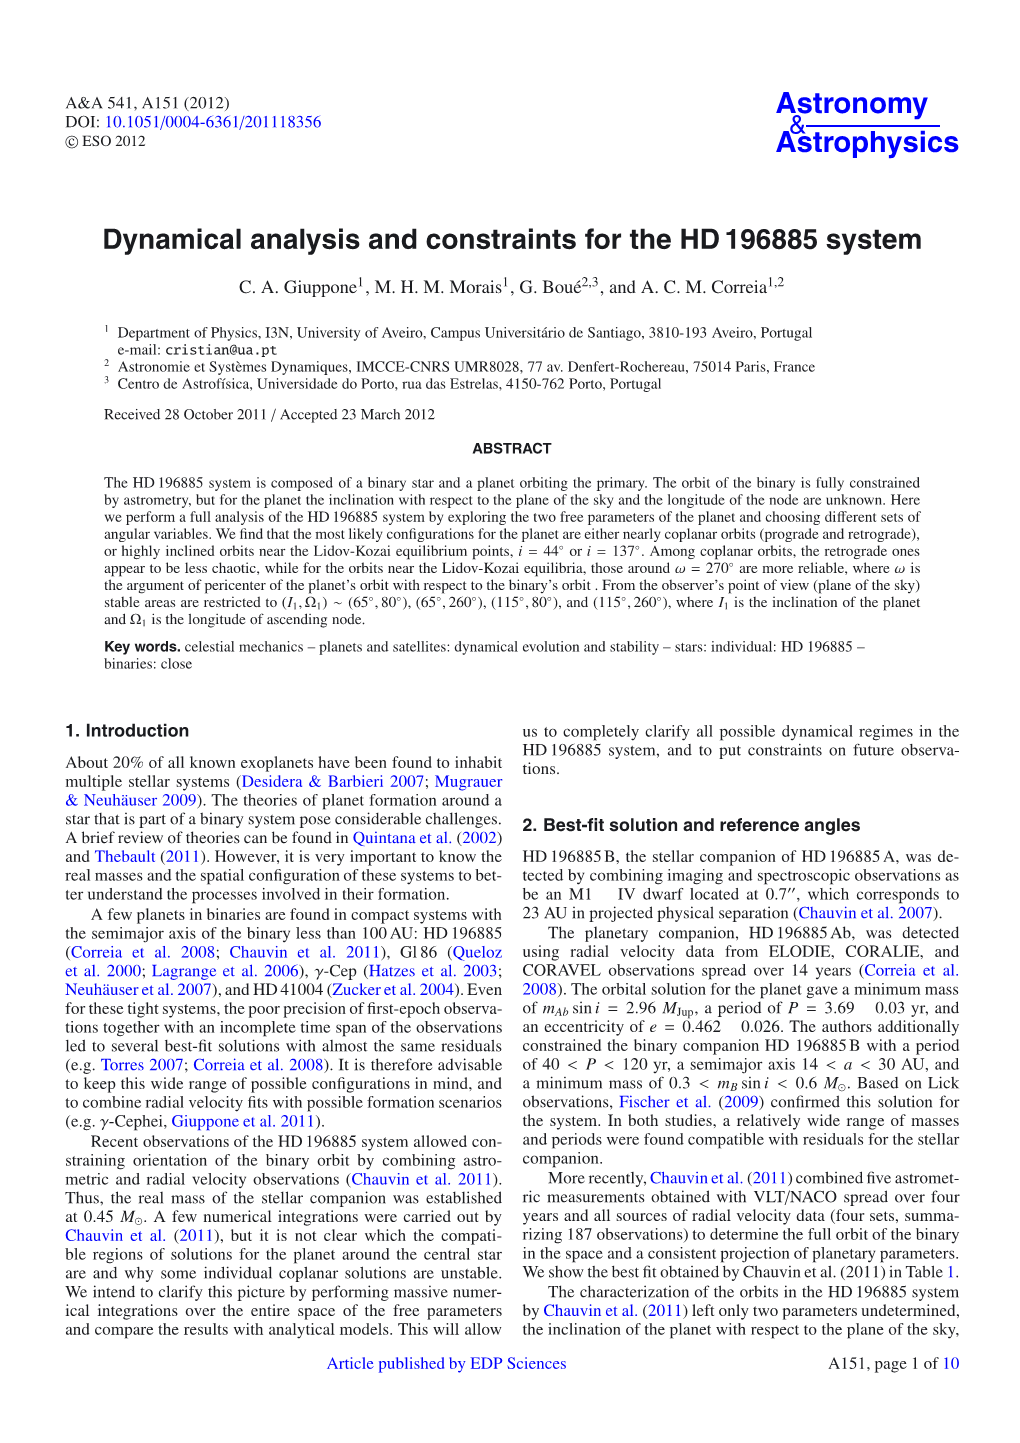 Dynamical Analysis and Constraints for the HD 196885 System